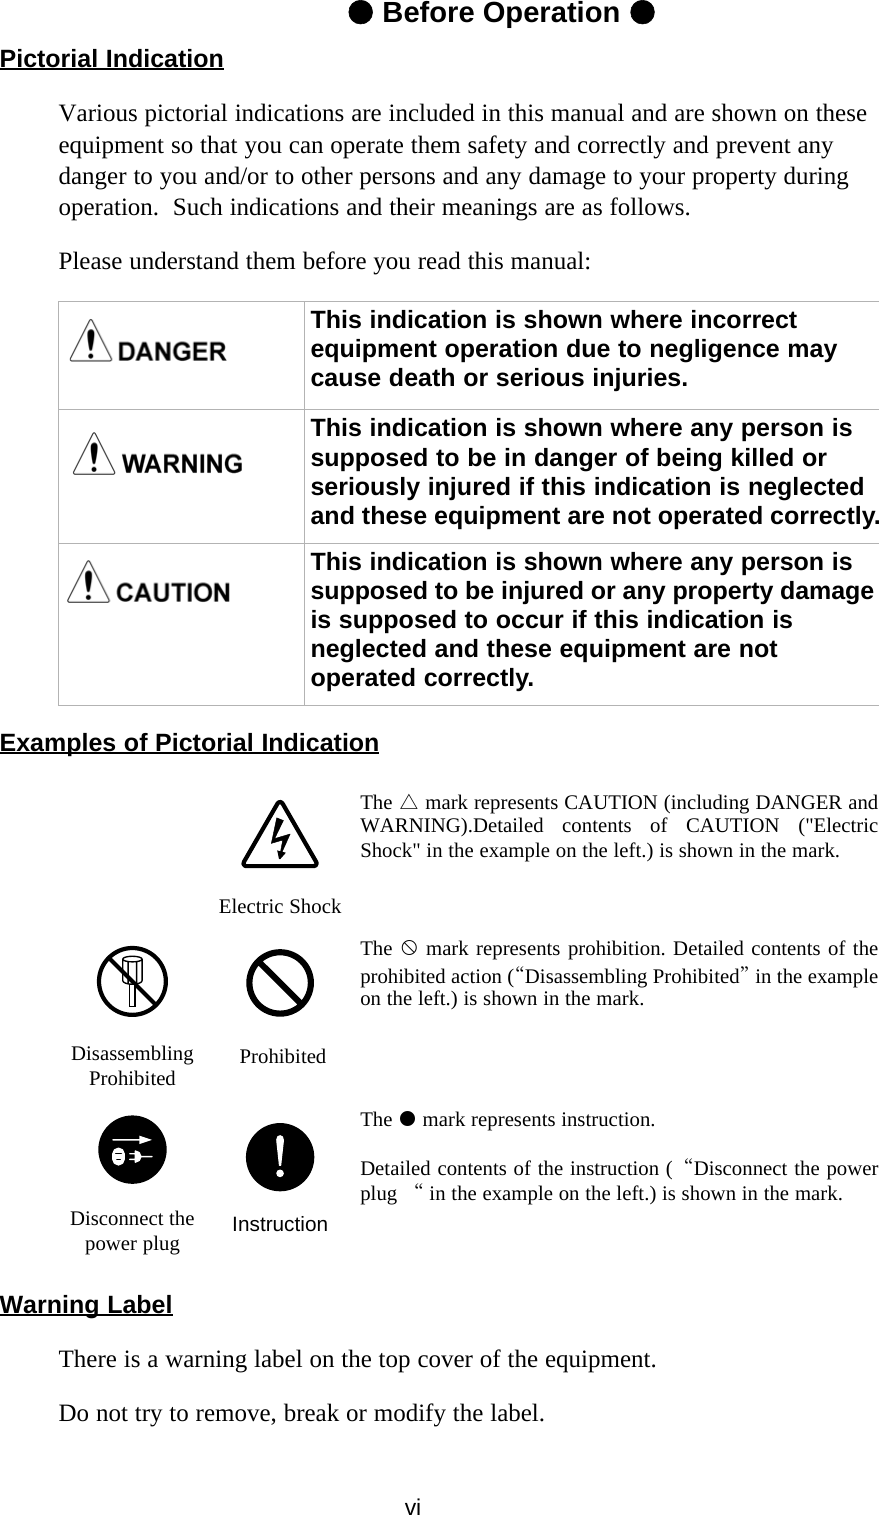 vi●Before Operation ●Pictorial IndicationVarious pictorial indications are included in this manual and are shown on these equipment so that you can operate them safety and correctly and prevent any danger to you and/or to other persons and any damage to your property during operation.  Such indications and their meanings are as follows.Please understand them before you read this manual: Examples of Pictorial IndicationWarning LabelThere is a warning label on the top cover of the equipment.Do not try to remove, break or modify the label.This indication is shown where incorrect equipment operation due to negligence may cause death or serious injuries.This indication is shown where any person is supposed to be in danger of being killed or seriously injured if this indication is neglected and these equipment are not operated correctly.This indication is shown where any person is supposed to be injured or any property damage is supposed to occur if this indication is neglected and these equipment are not operated correctly.Electric ShockThe △ mark represents CAUTION (including DANGER andWARNING).Detailed contents of CAUTION (&quot;ElectricShock&quot; in the example on the left.) is shown in the mark.Disassembling Prohibited  ProhibitedThe  mark represents prohibition. Detailed contents of theprohibited action (“Disassembling Prohibited” in the exampleon the left.) is shown in the mark.Disconnect the power plug InstructionThe  mark represents instruction.Detailed contents of the instruction (“Disconnect the powerplug “ in the example on the left.) is shown in the mark.!